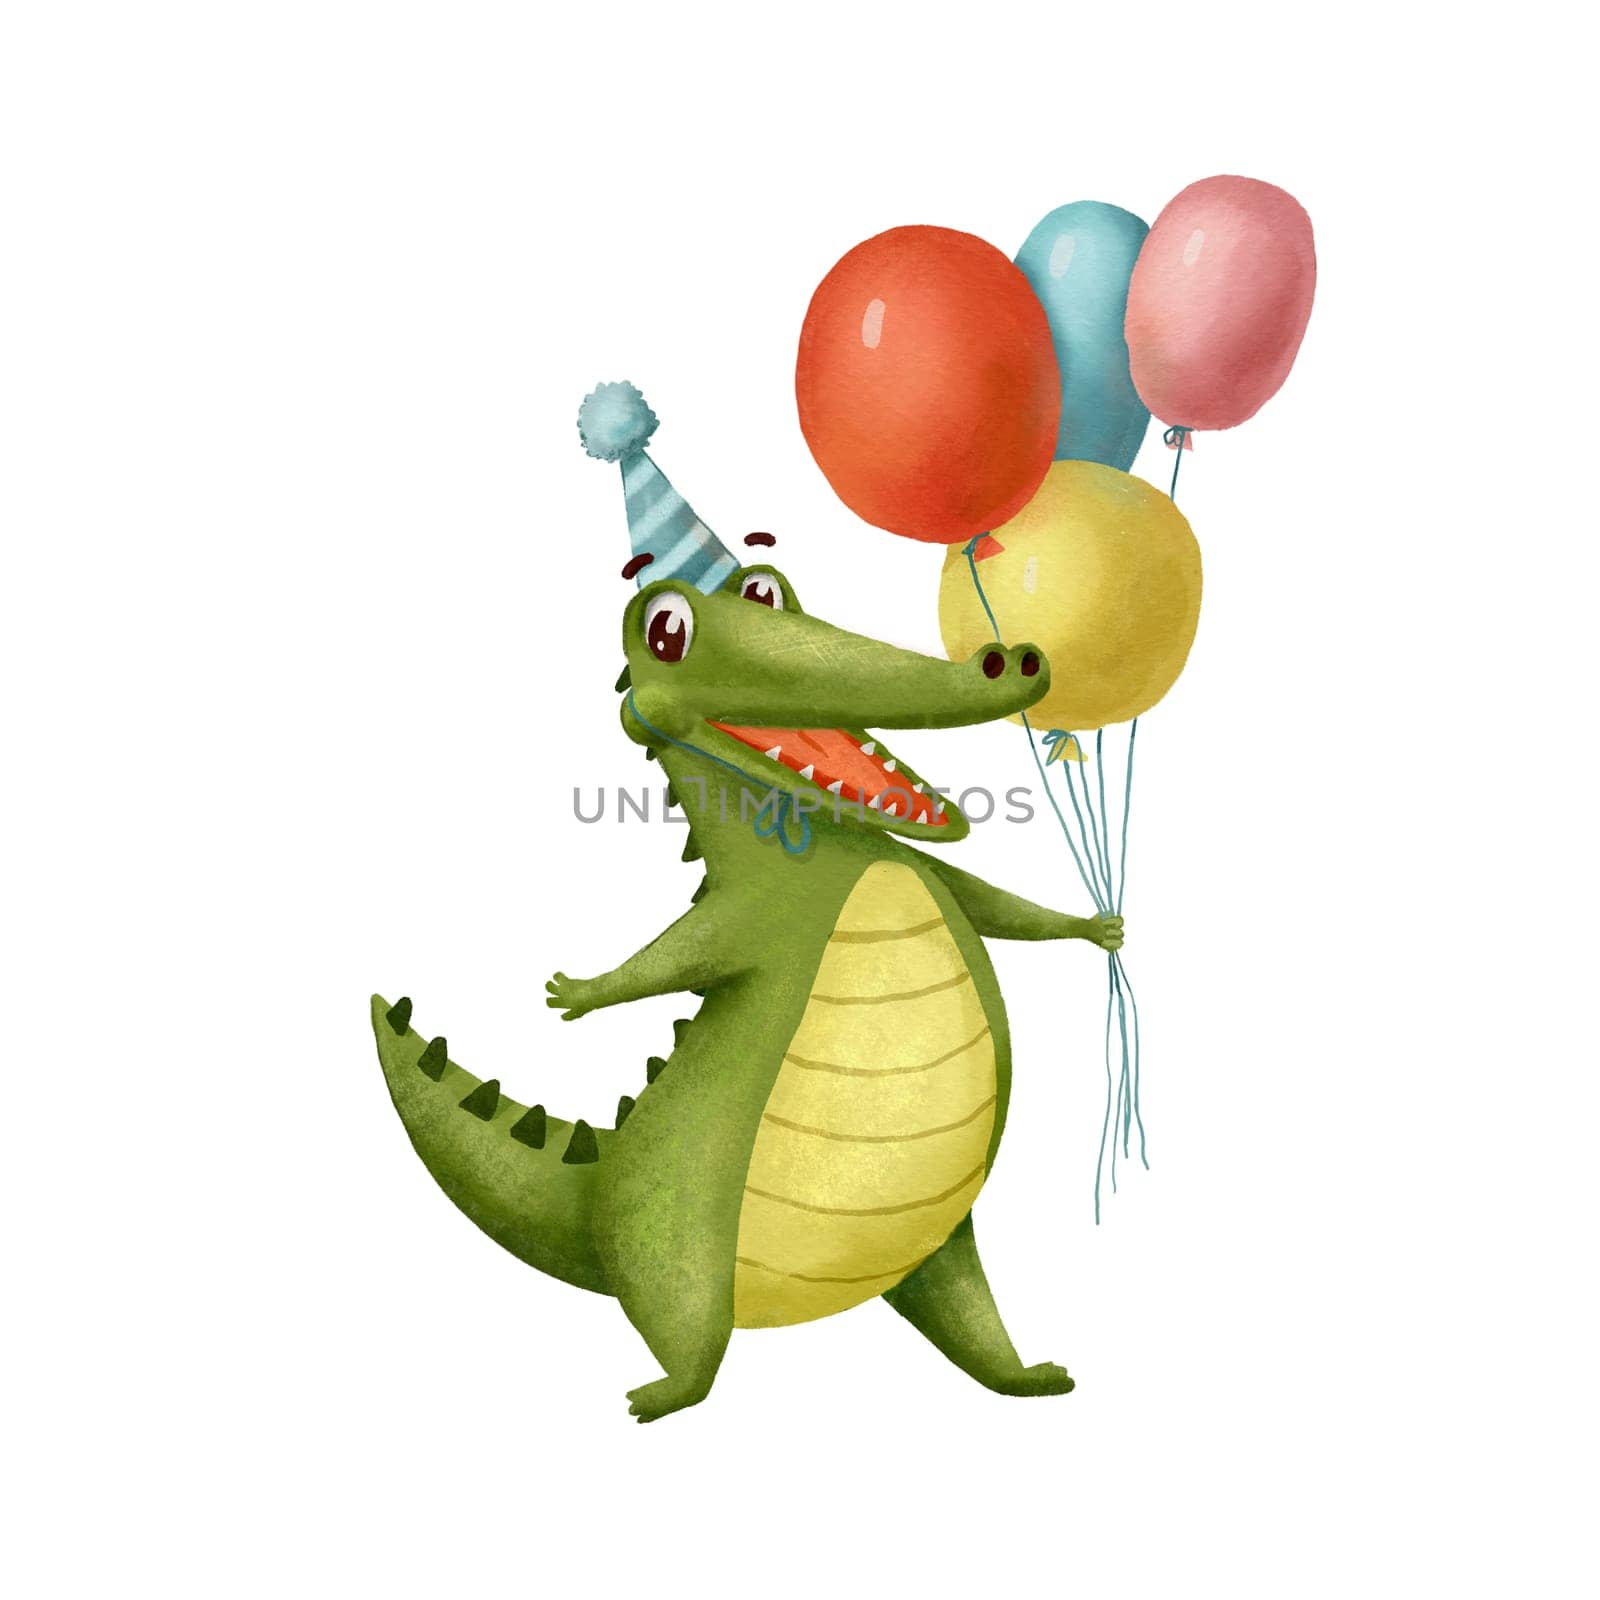 Funny crocodile in cap holds balloons and laughs. Watercolor animal character for birthday card isolated on white background